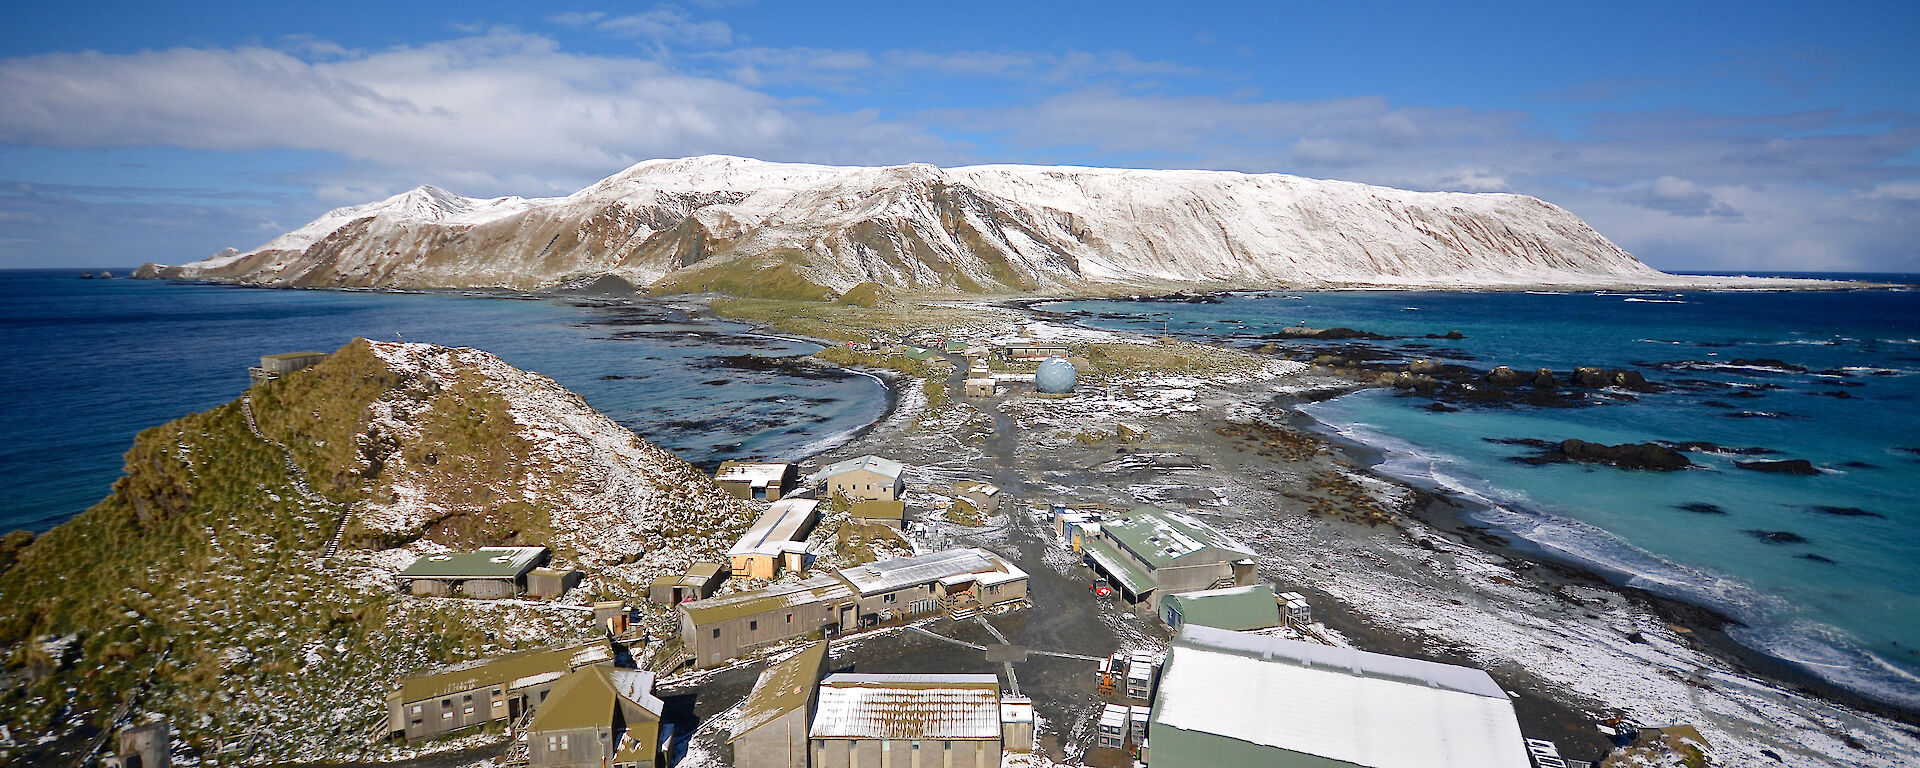 Research station at Macquarie Island.